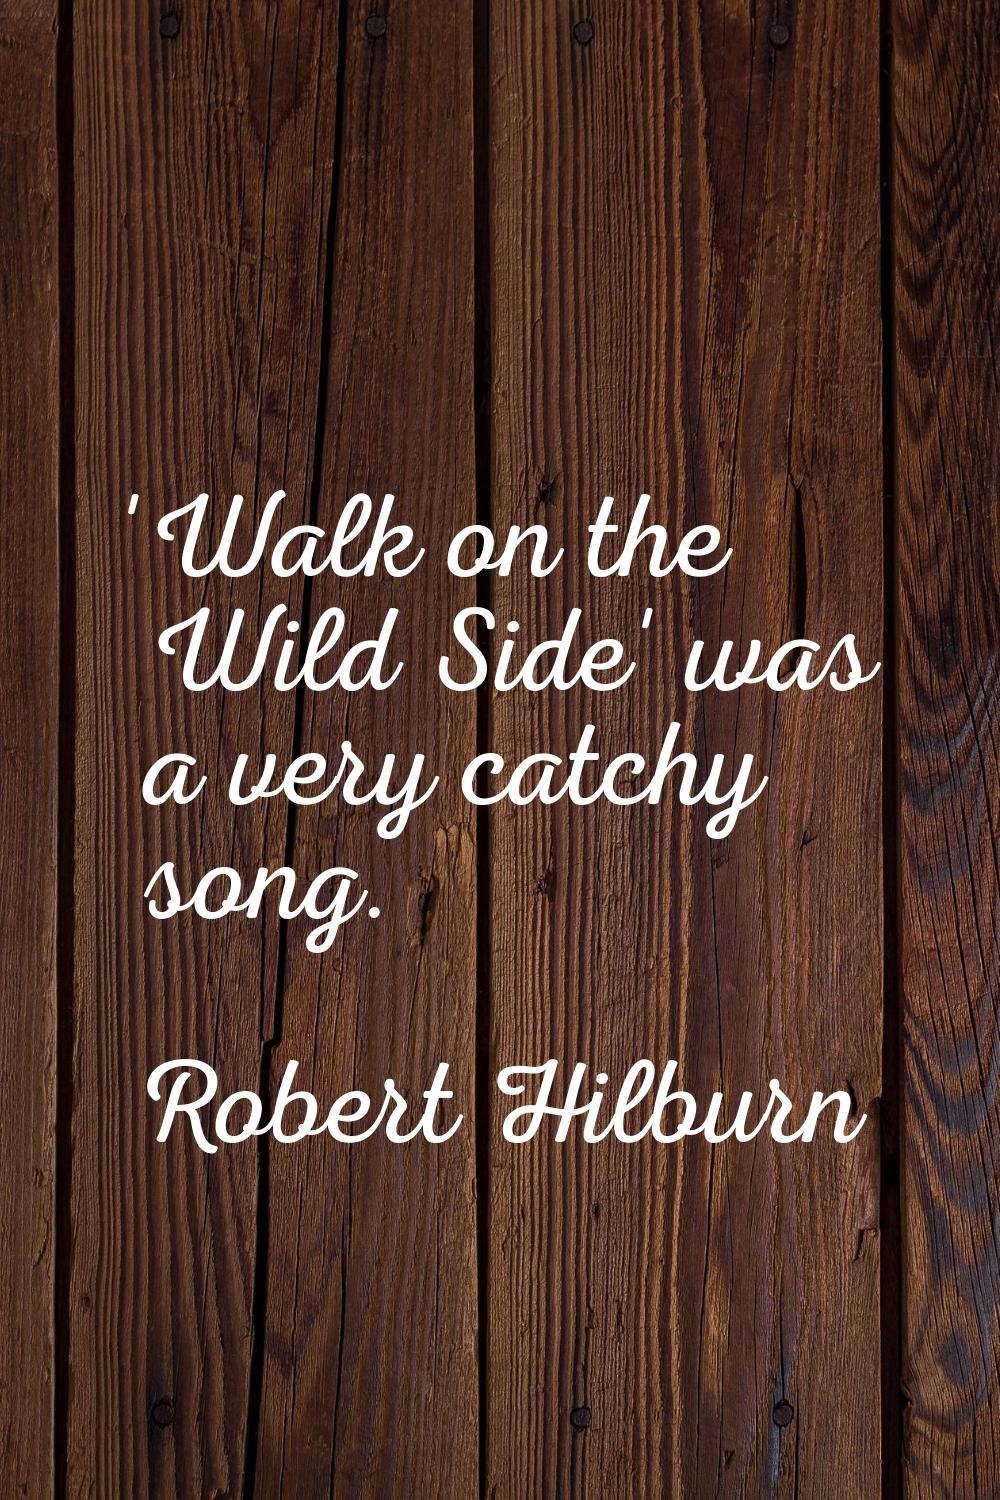 'Walk on the Wild Side' was a very catchy song.